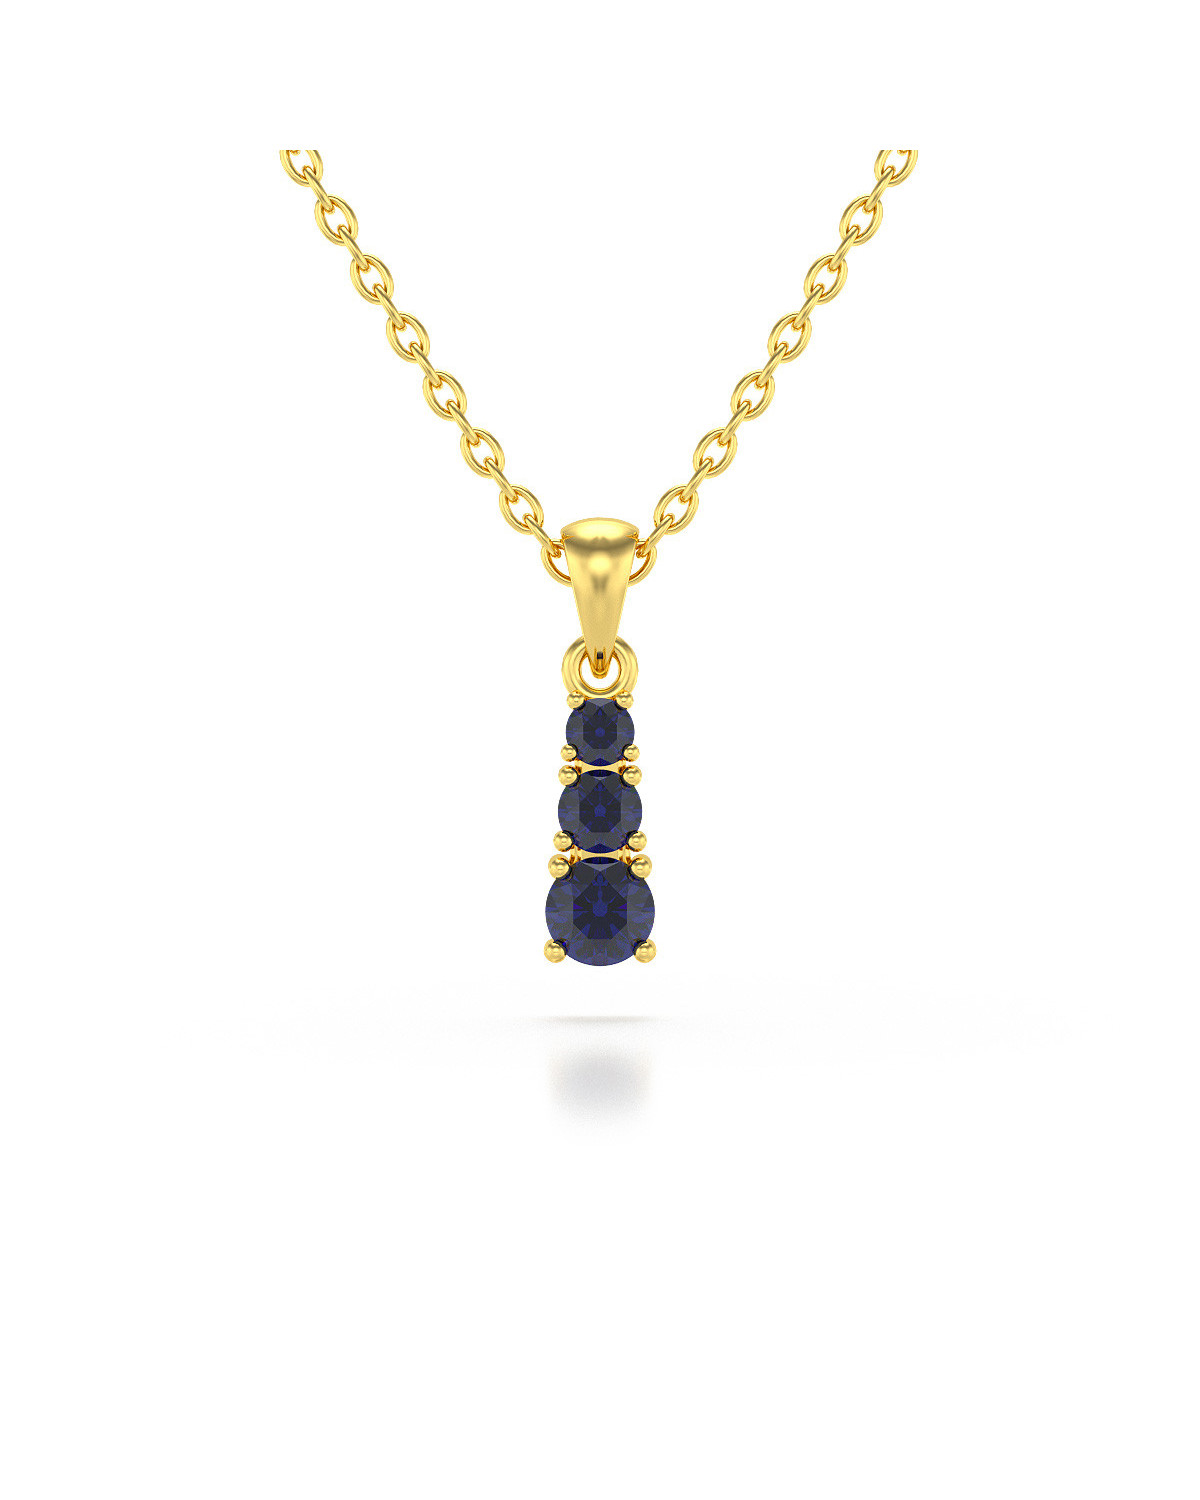 14K Gold Sapphire Necklace Pendant Gold Chain included